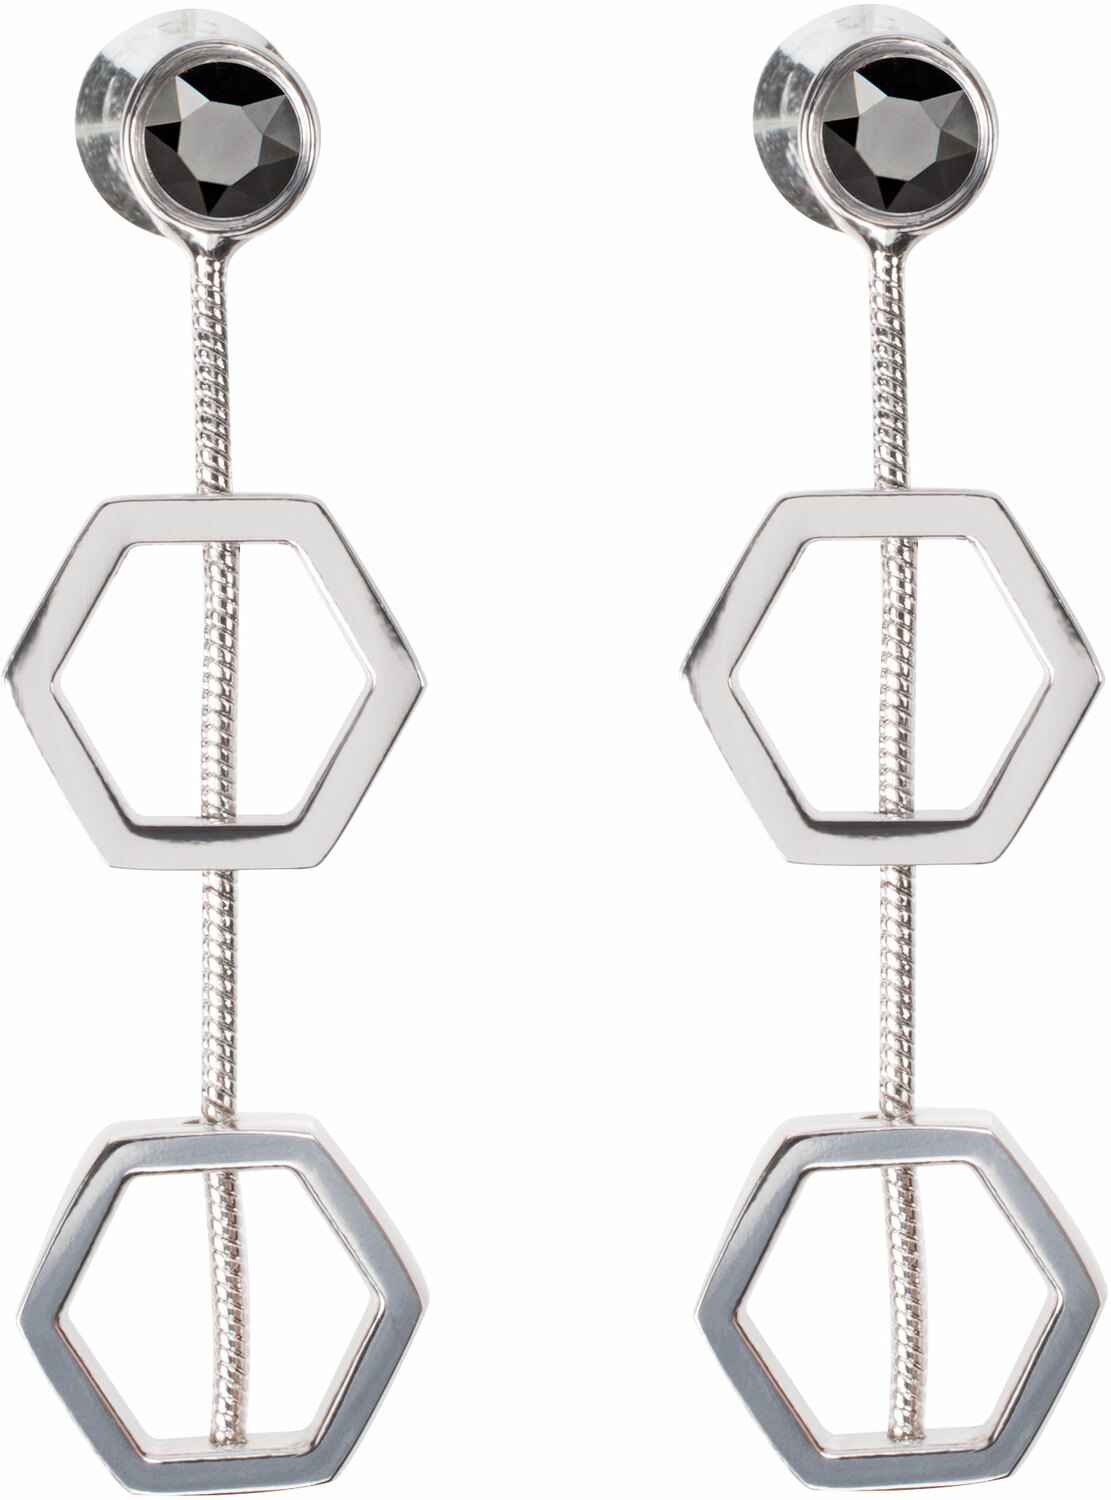 Jet - Silver Hexagon by H2Z Made with Swarovski Elements - Jet - Silver Hexagon - 1.5" Austrian Crystal Dangle Earrings